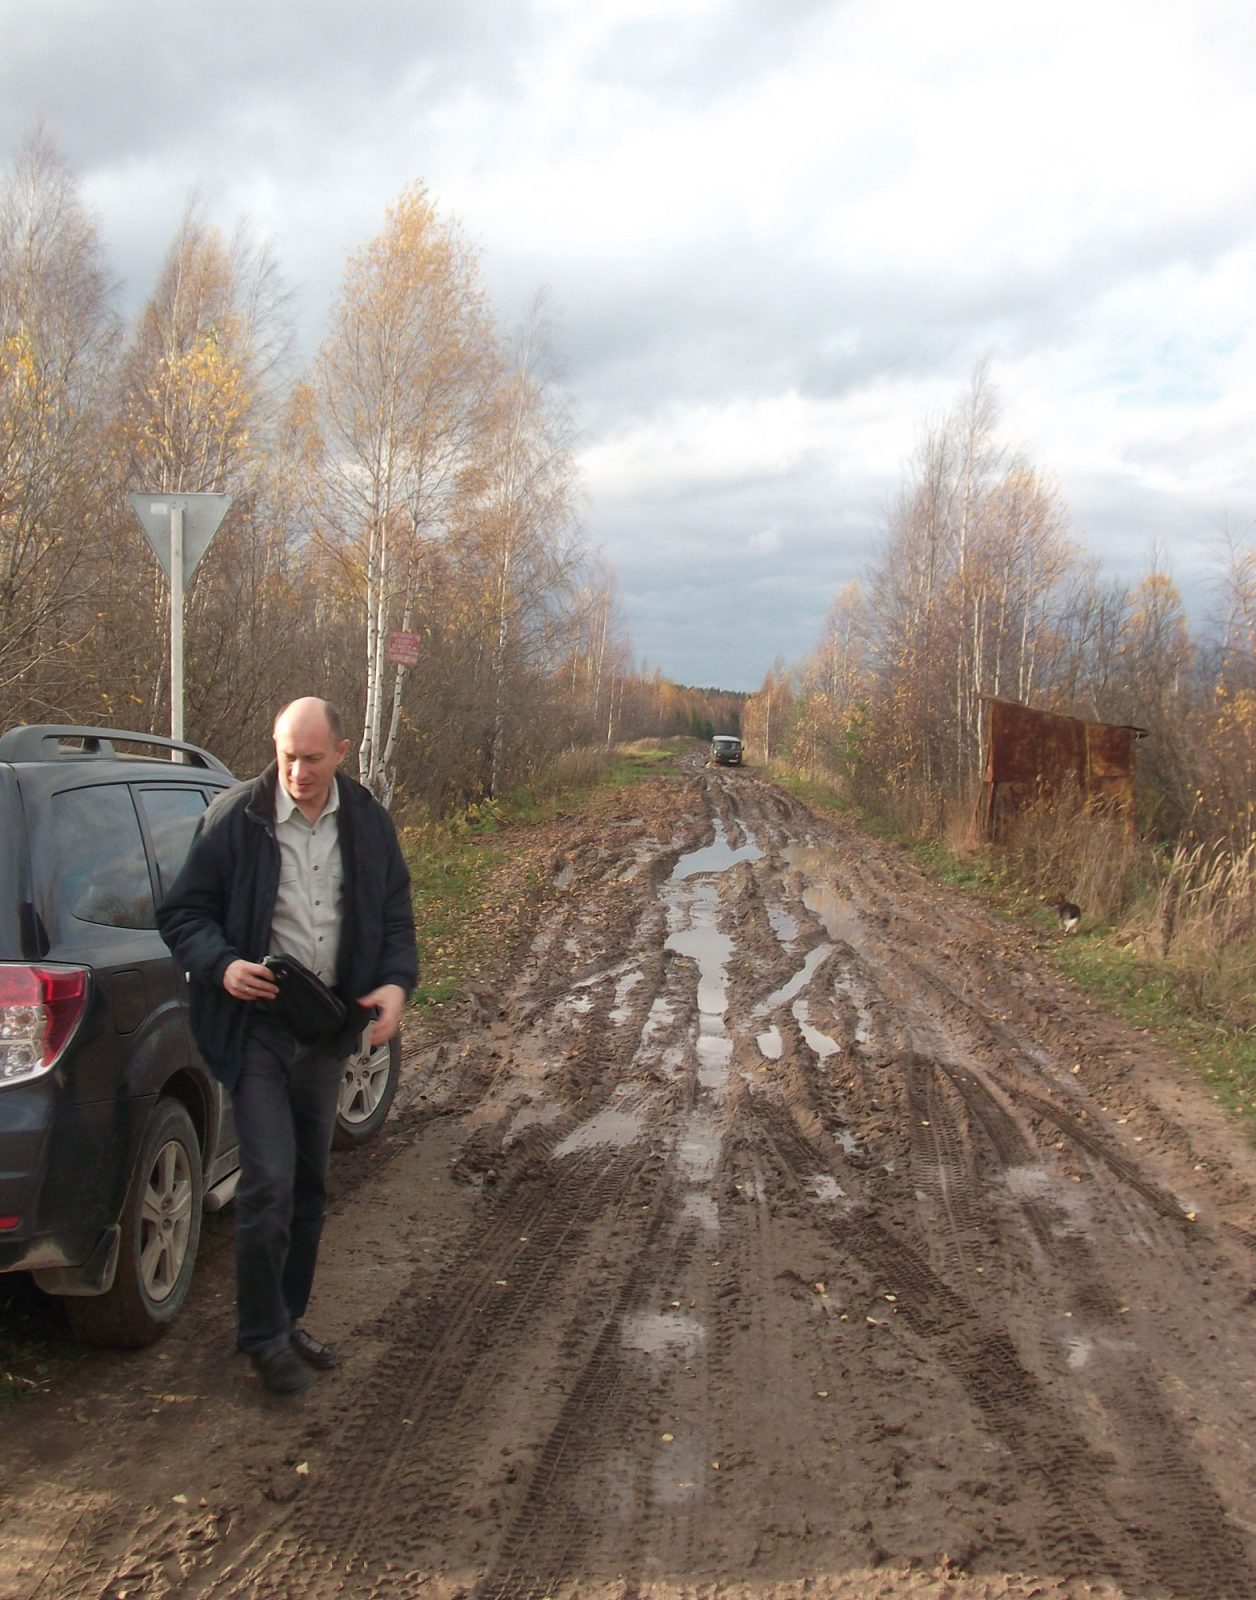 Man stands next to a car in a muddy dirt road, birch trees on each side.